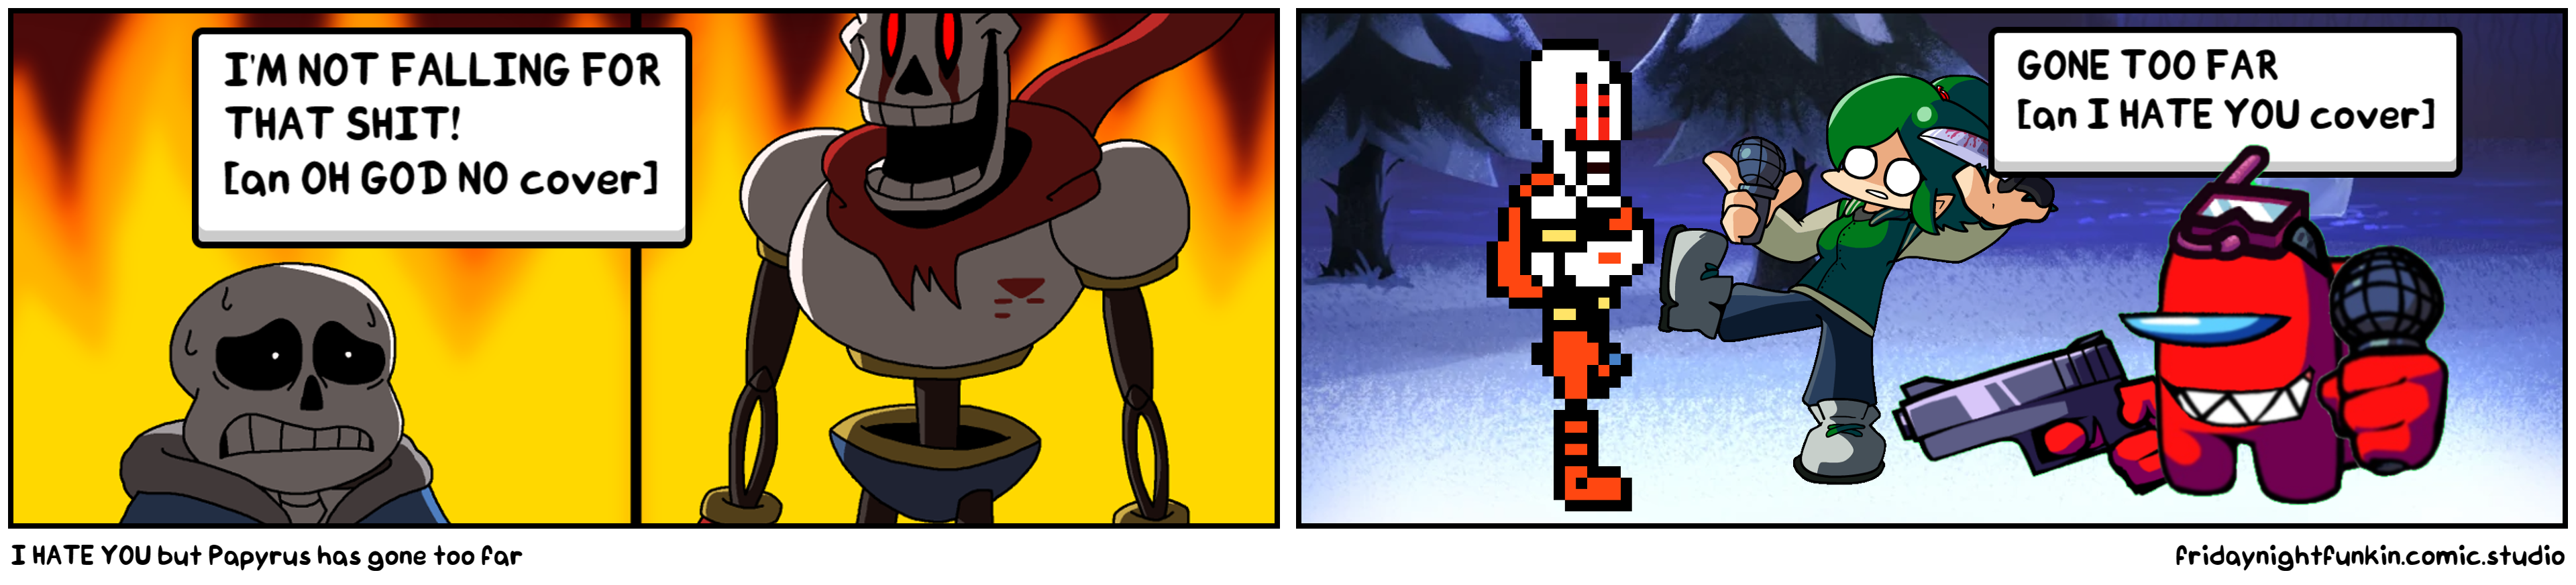 I HATE YOU but Papyrus has gone too far